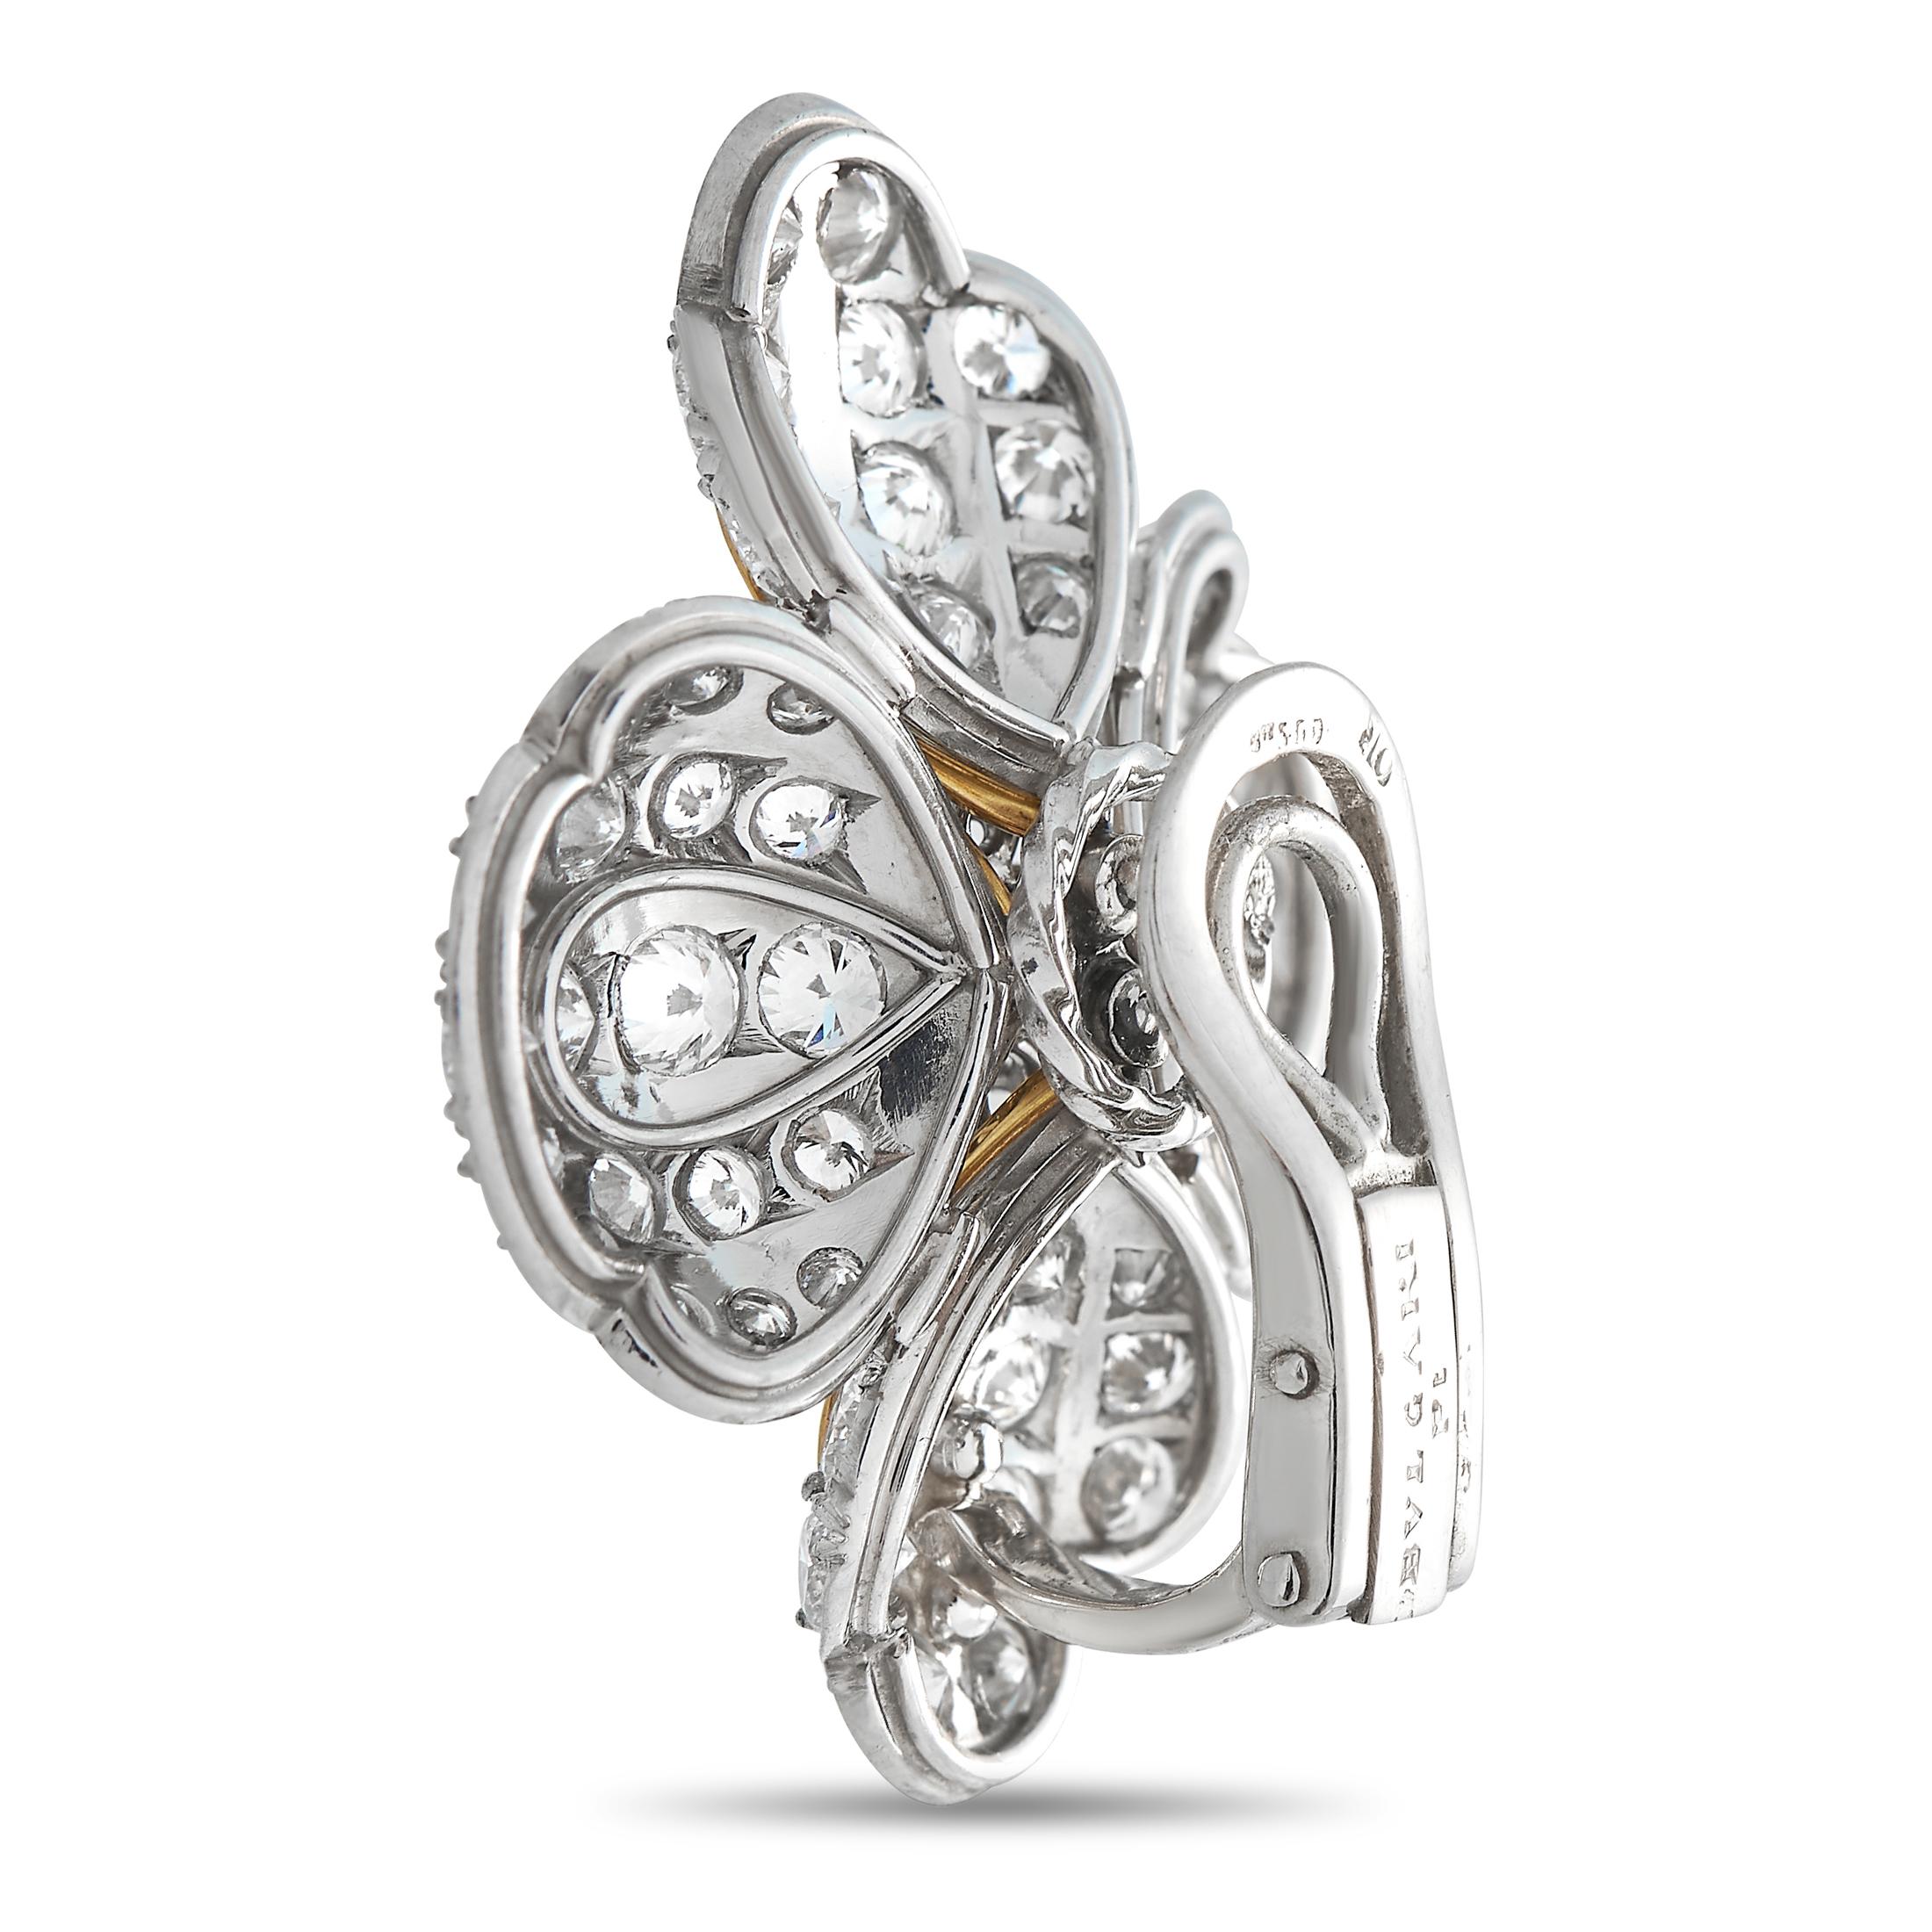 Sparkling round-cut diamonds with a total weight of 7.0 carats make these Bvlgari earrings endlessly impressive. Crafted from a combination of Platinum and shimmering 18K yellow gold, each one features a dramatic flower-shaped setting measuring